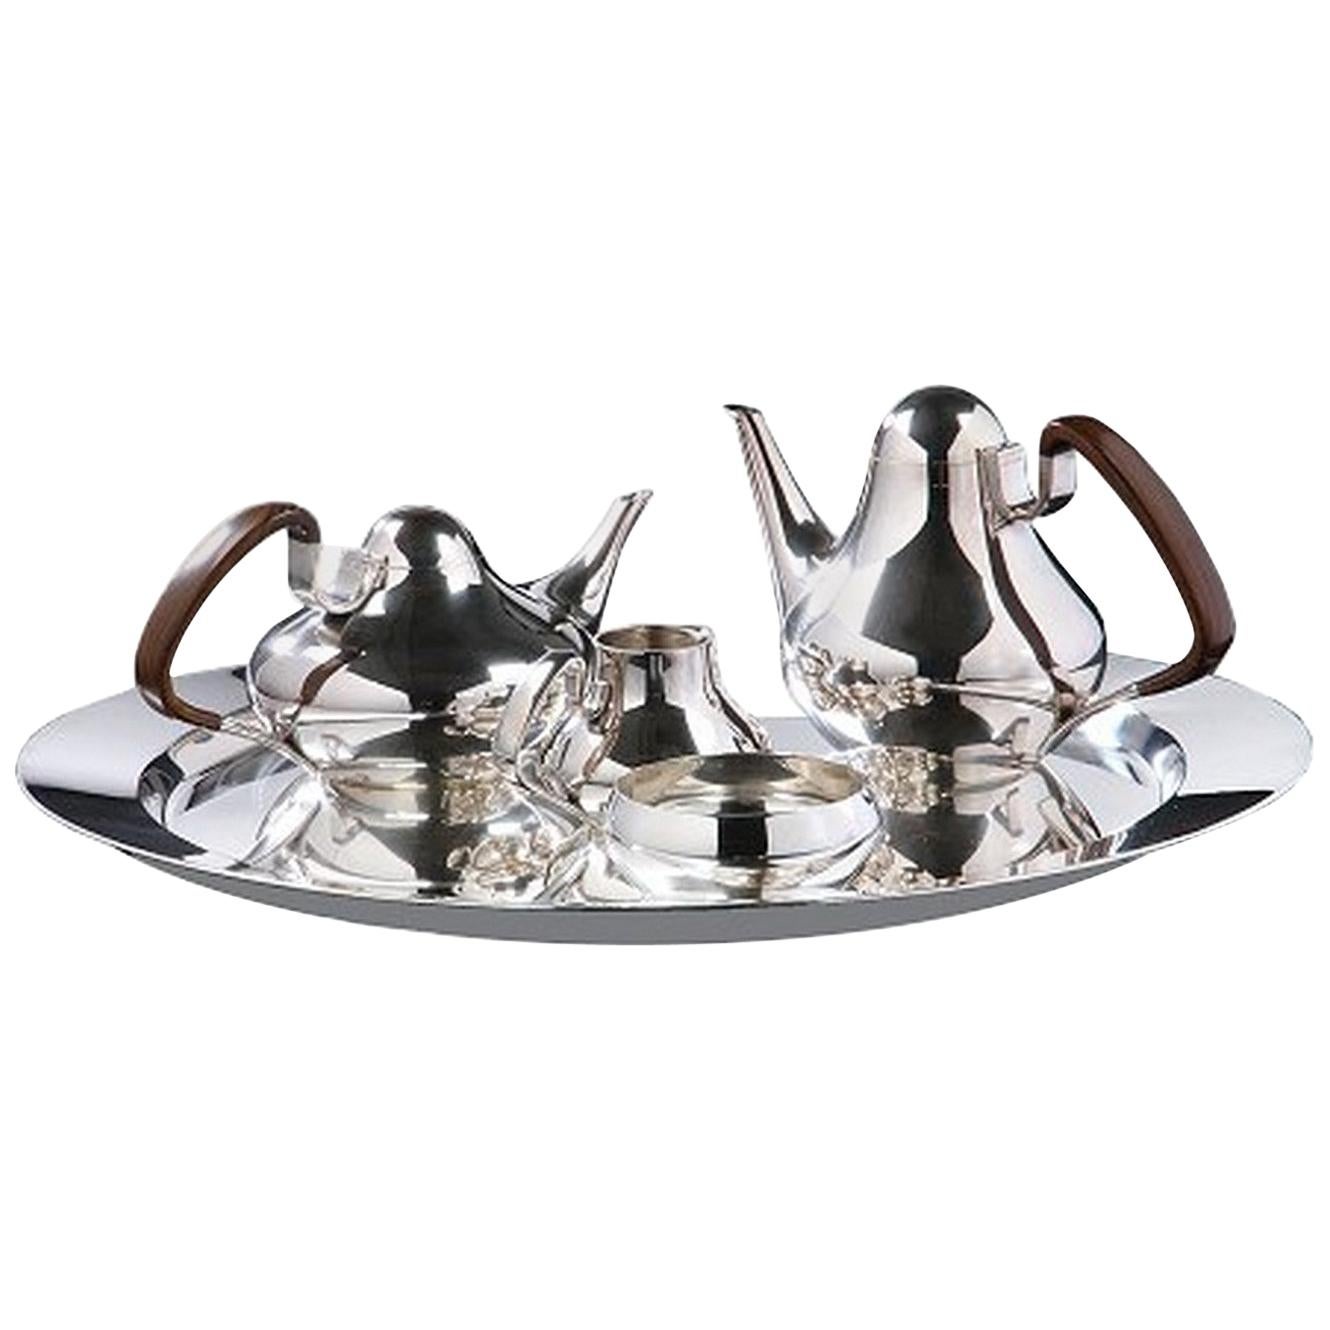 Georg Jensen Sterling Silver Henning Koppel Tea and Coffee Set with Tray No 1017 For Sale